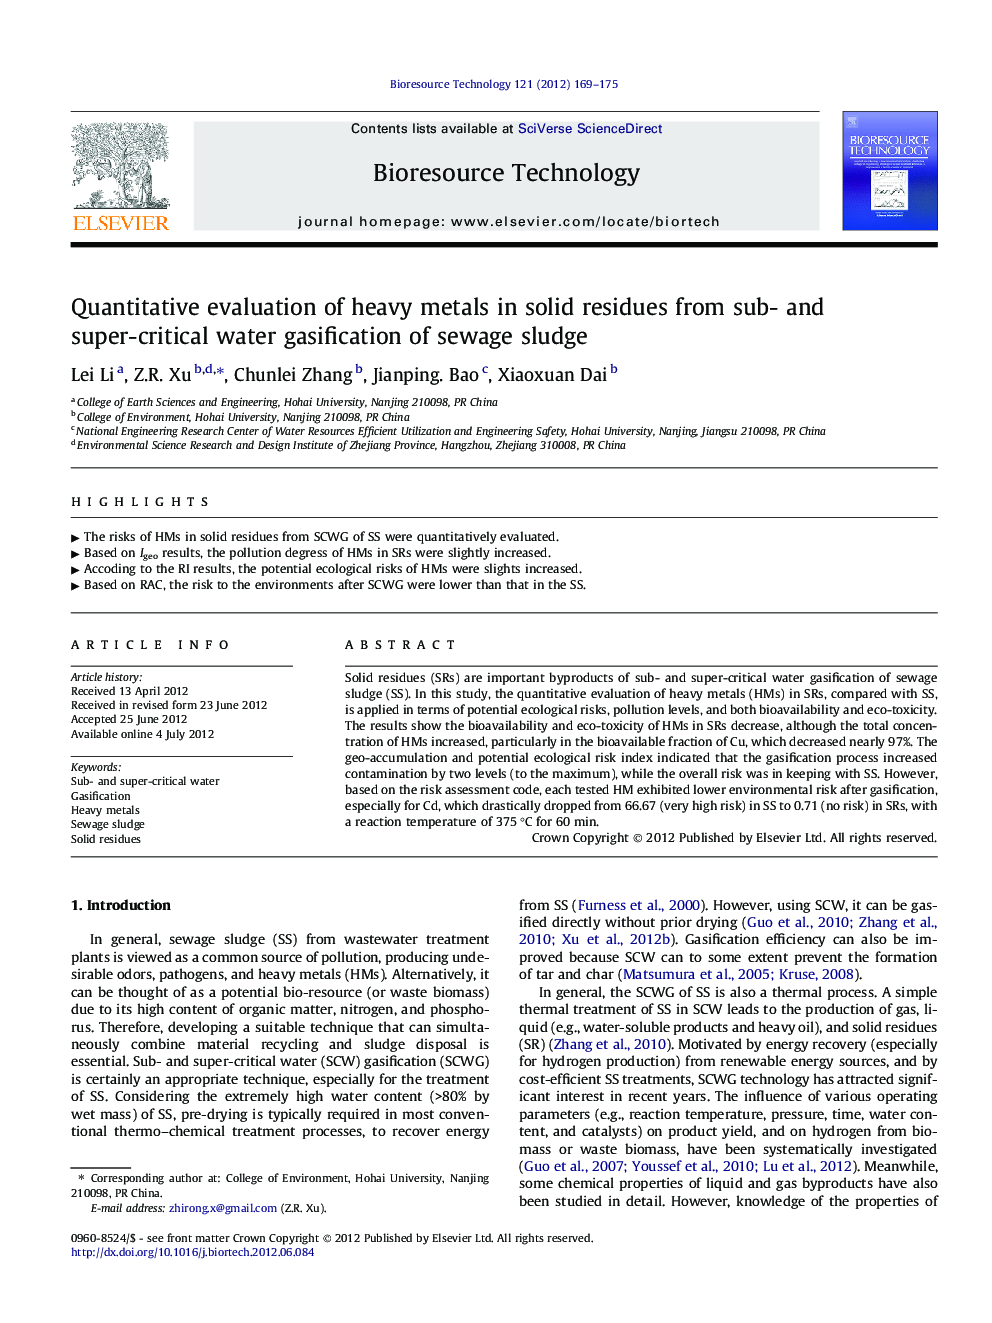 Quantitative evaluation of heavy metals in solid residues from sub- and super-critical water gasification of sewage sludge